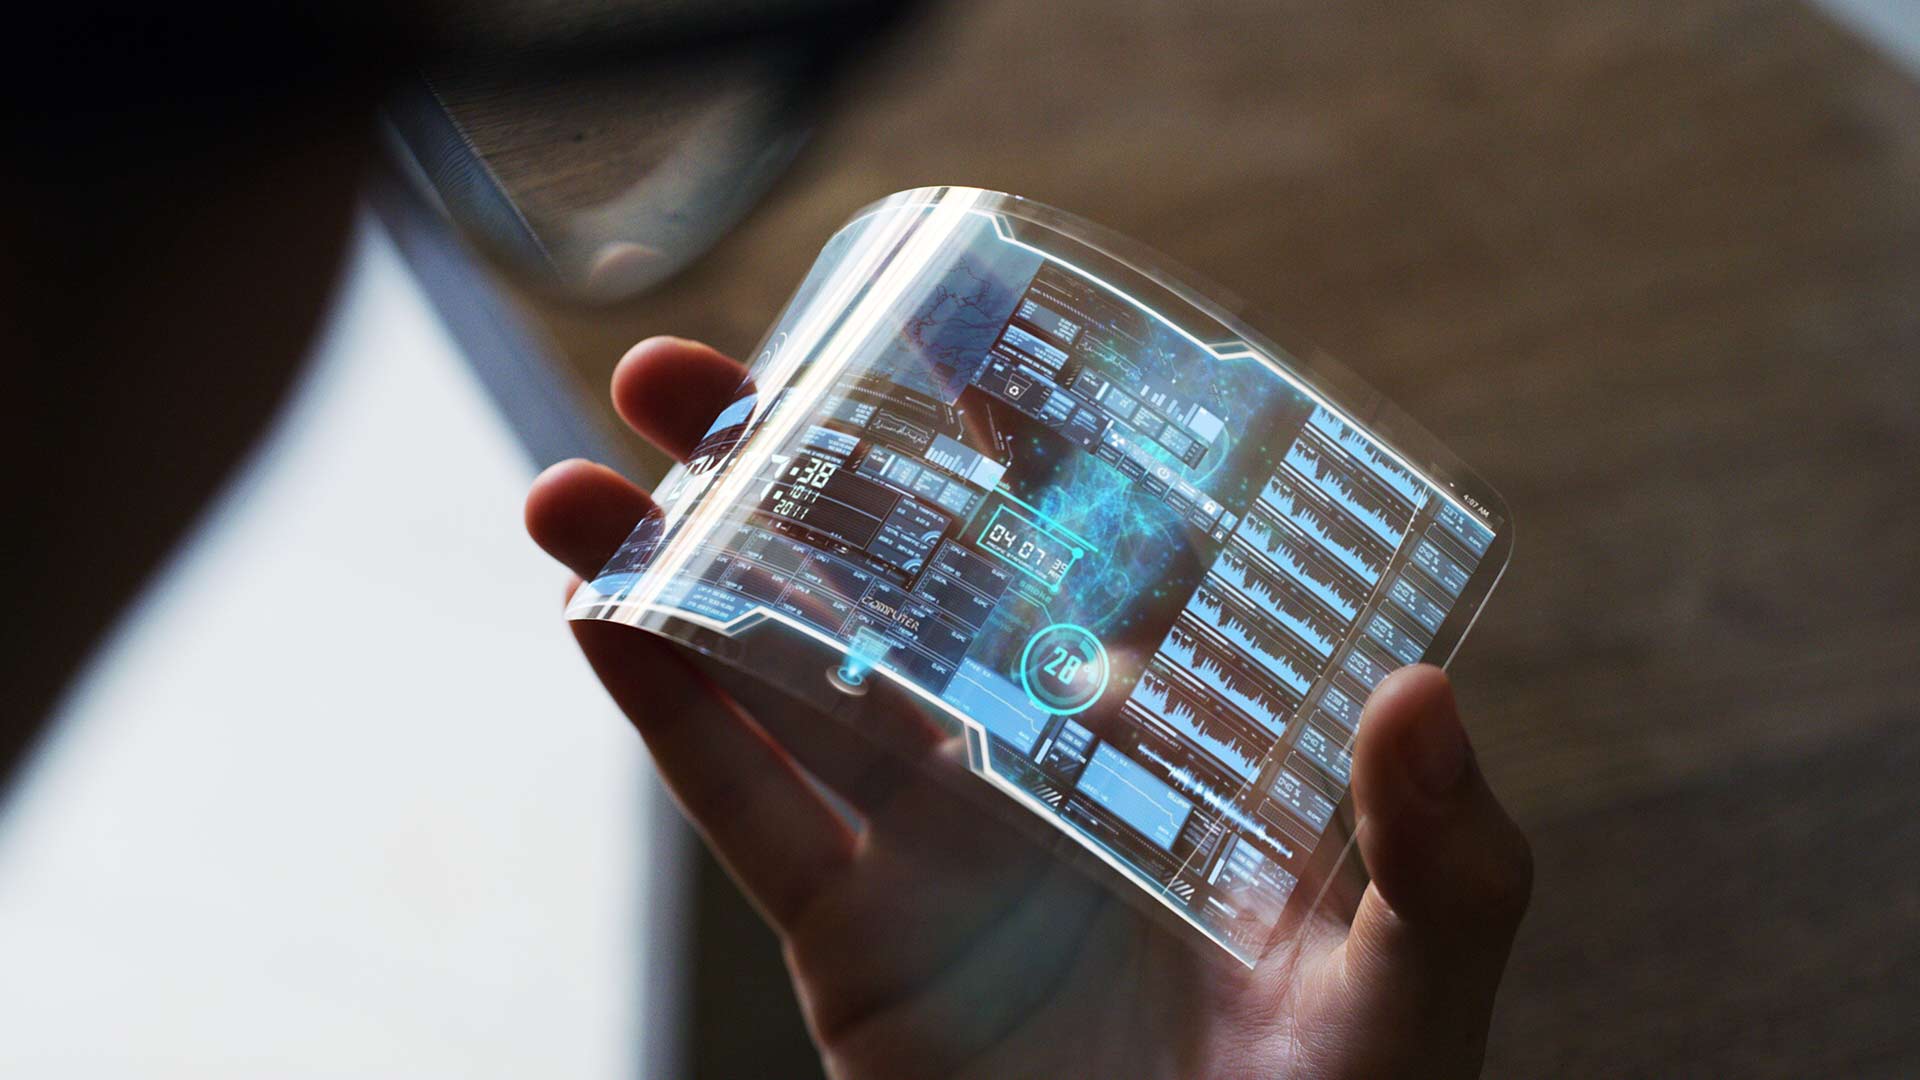 Is this the future of the smartphone? Image: